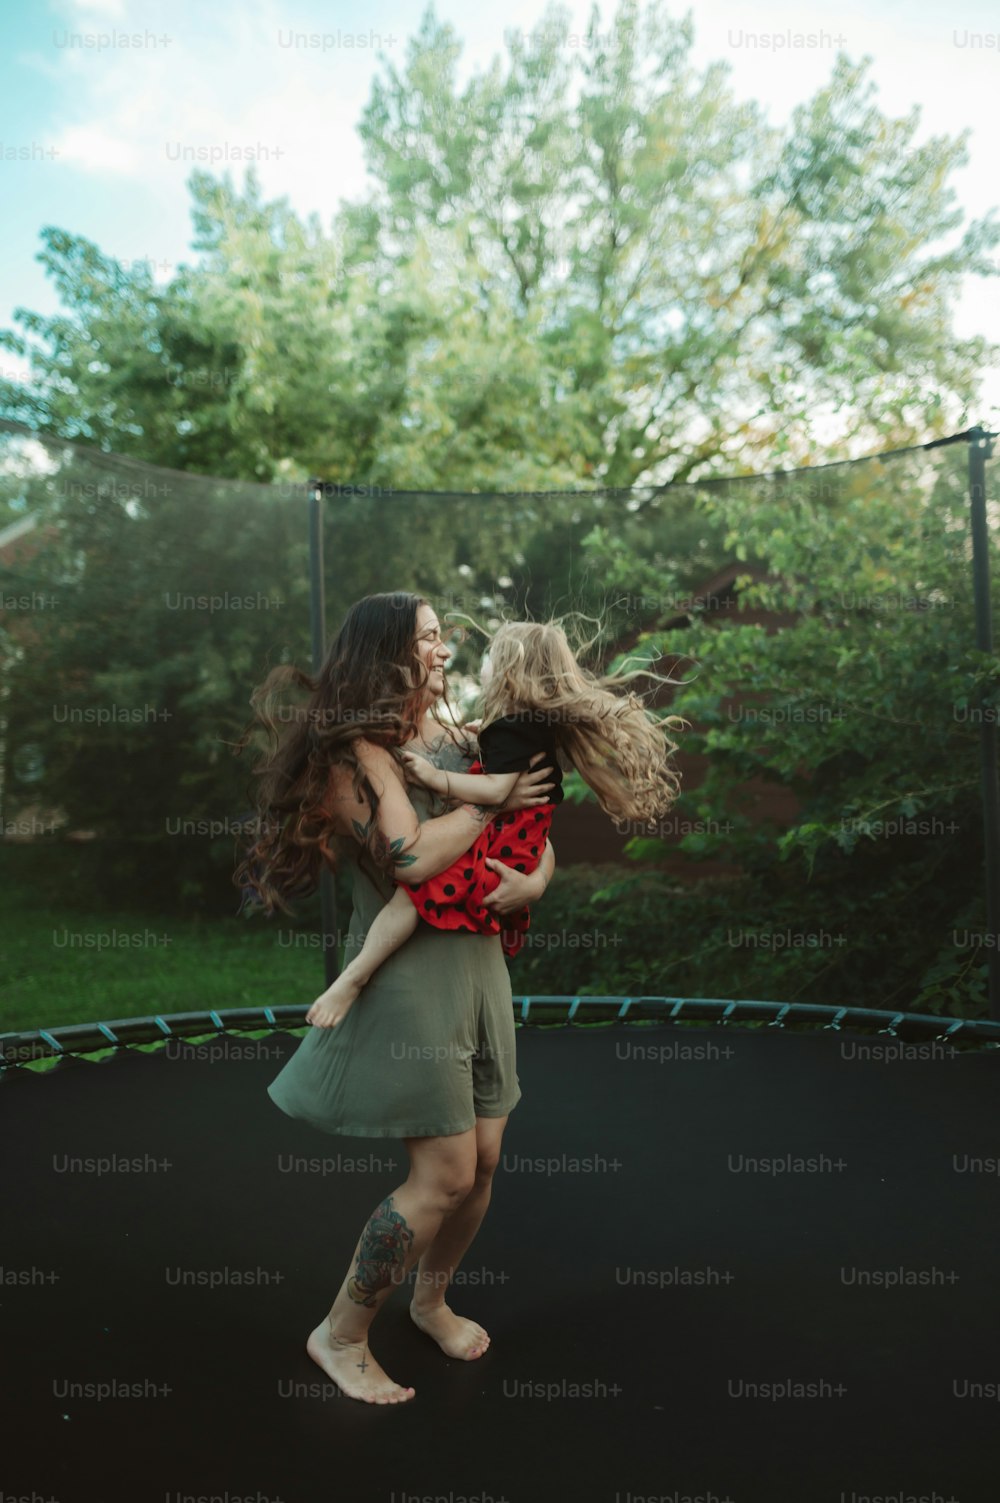 a woman holding a child on top of a trampoline